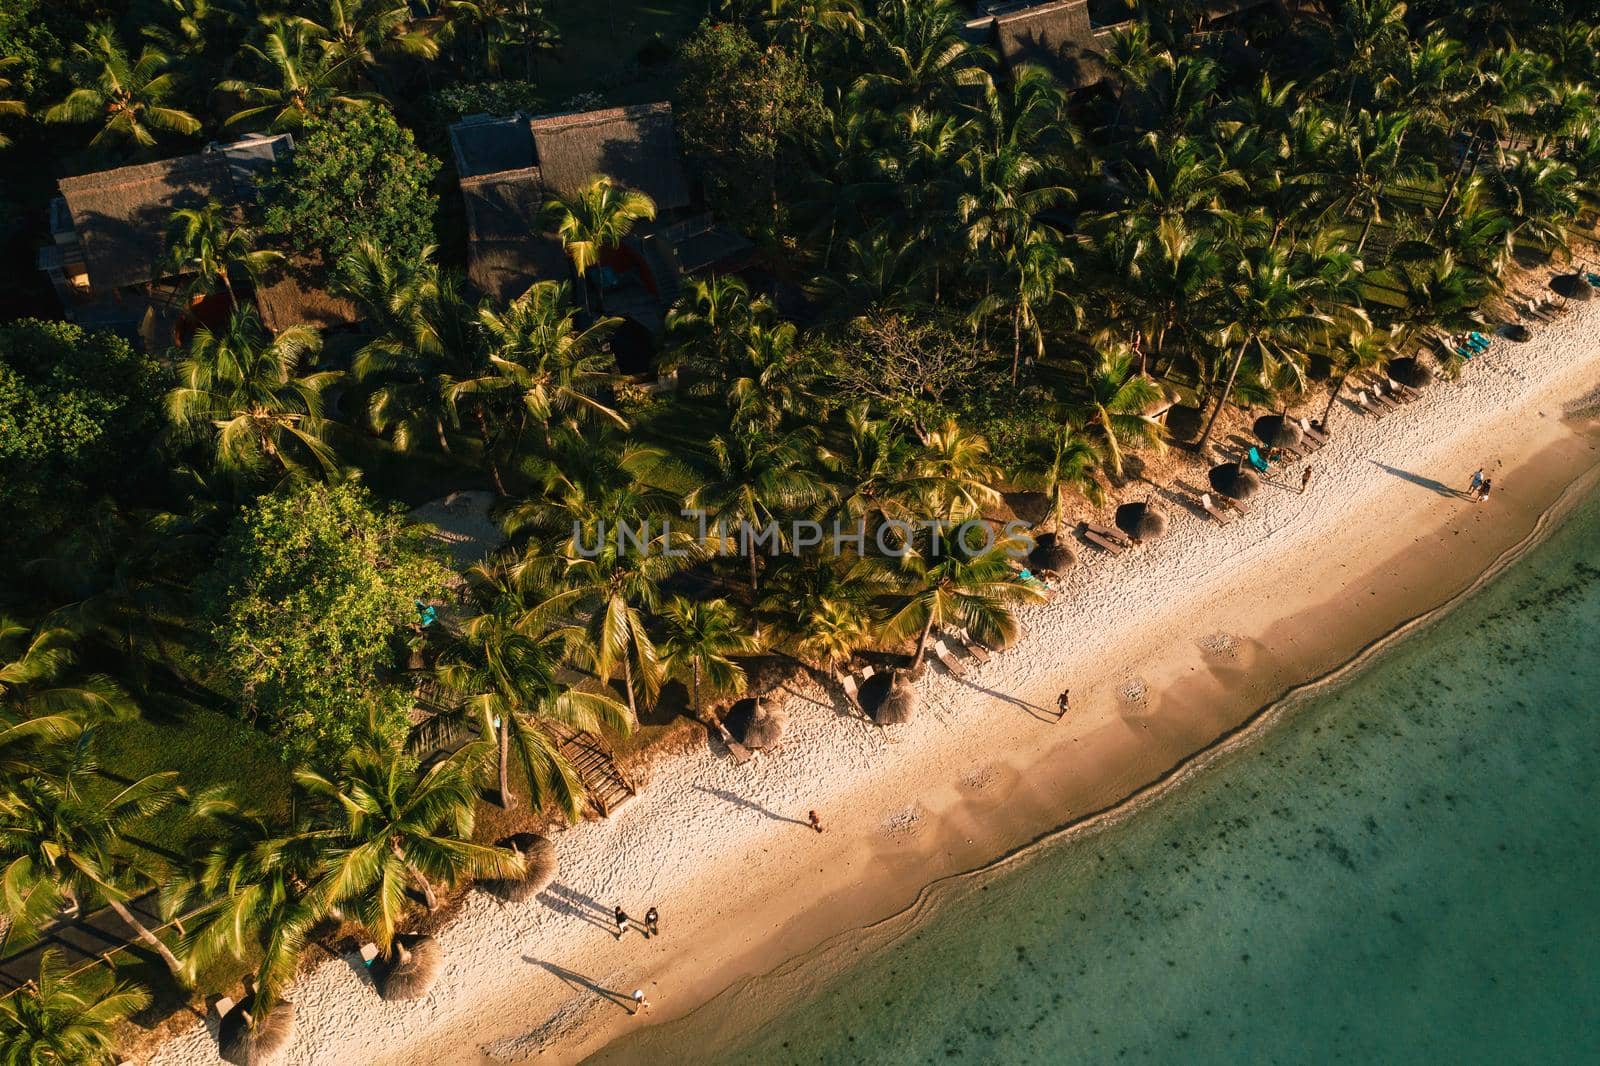 On the beautiful beach of the island of Mauritius along the coast. Shooting from a bird's eye view of the island of Mauritius